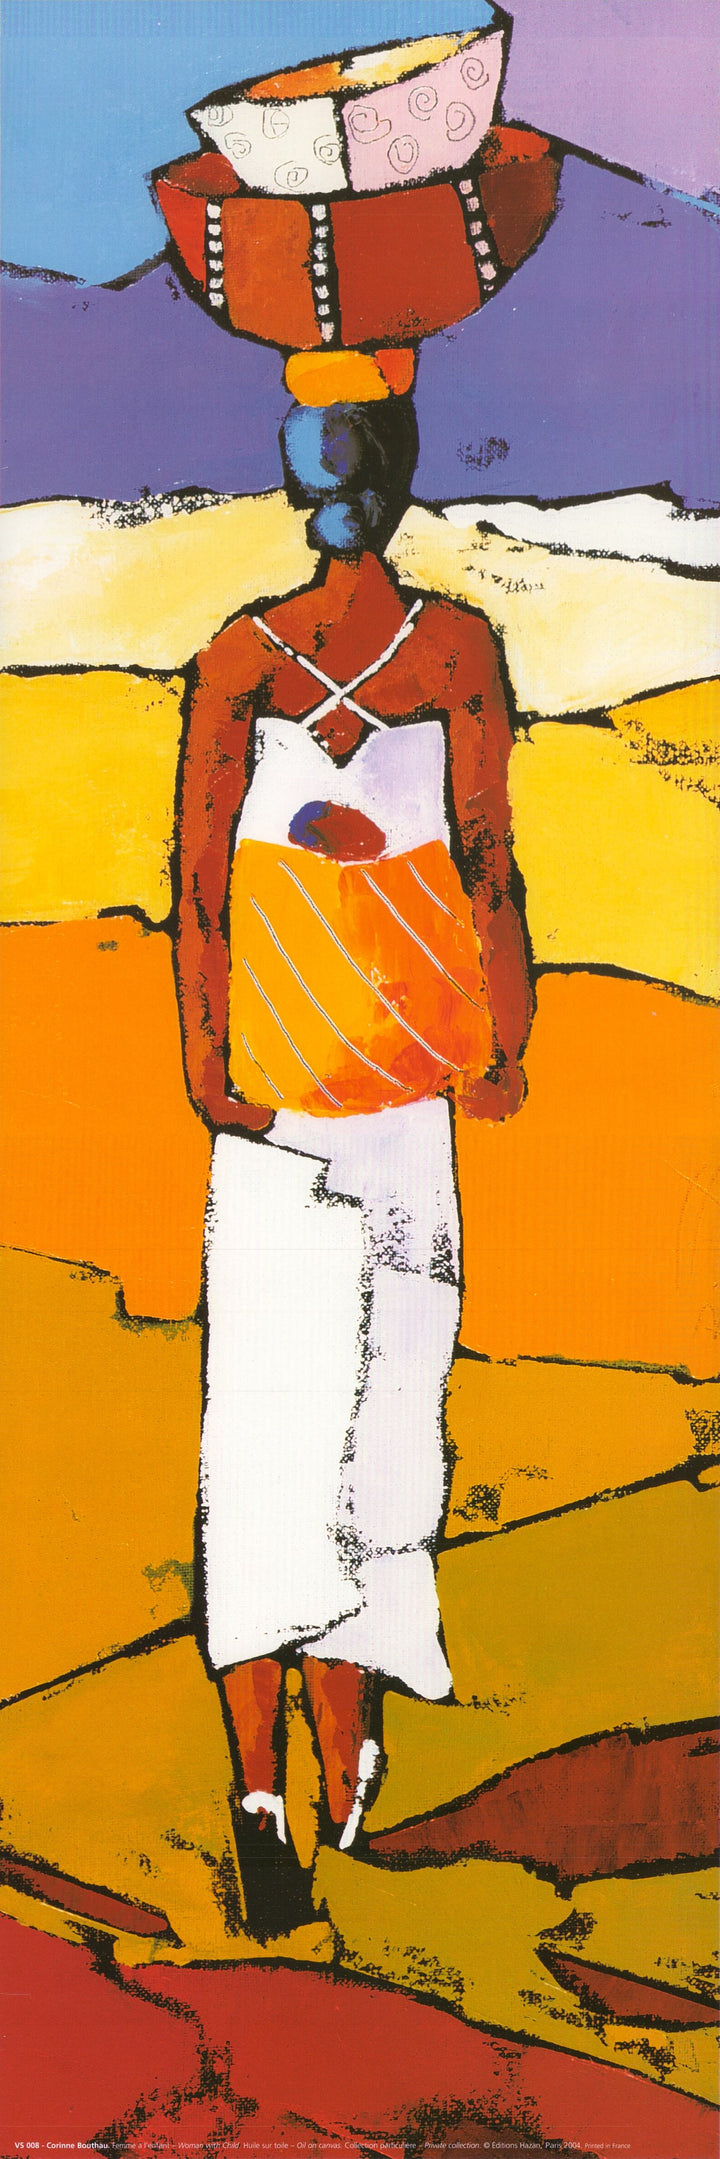 Woman with Child by Corinne Bouthau - 8 X 24 Inches (Art Print)